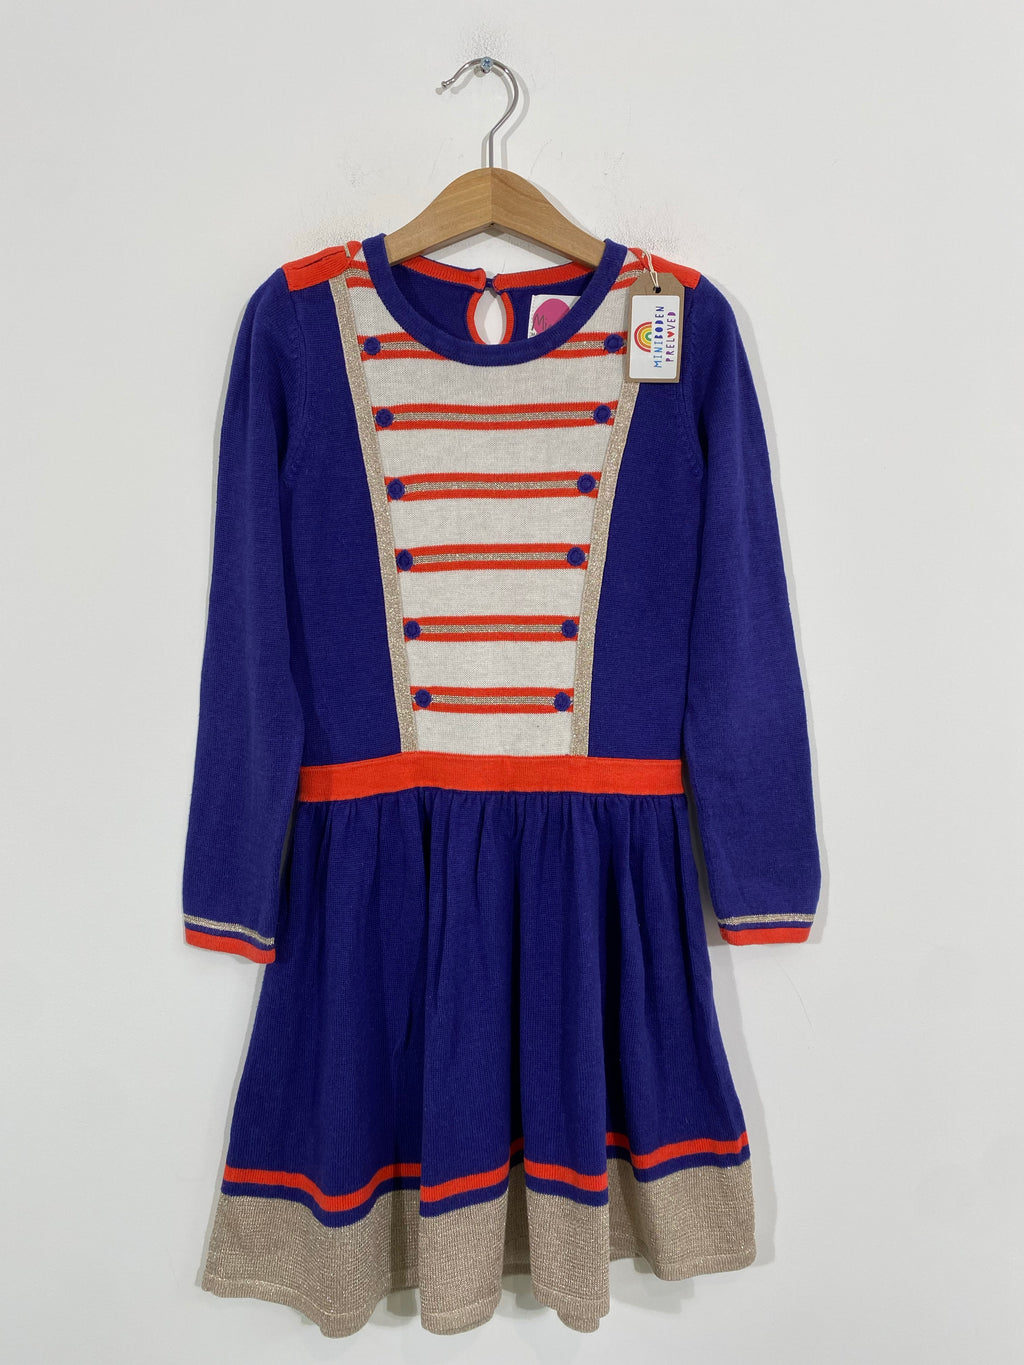 Gorgeous Navy Soldier Party Dress (6-7 Years)